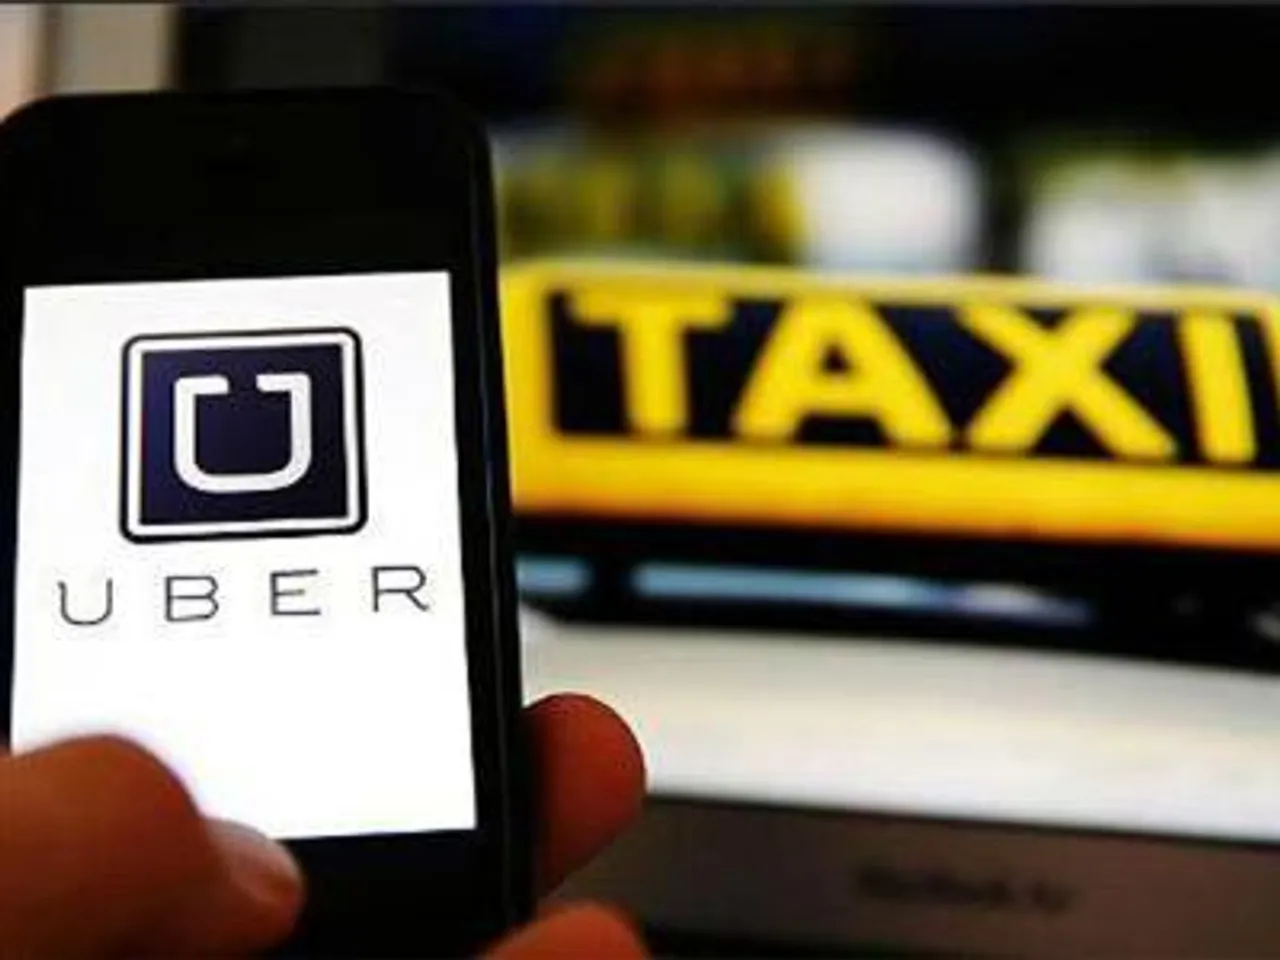 Uber sued by rape victim for accessing medical records